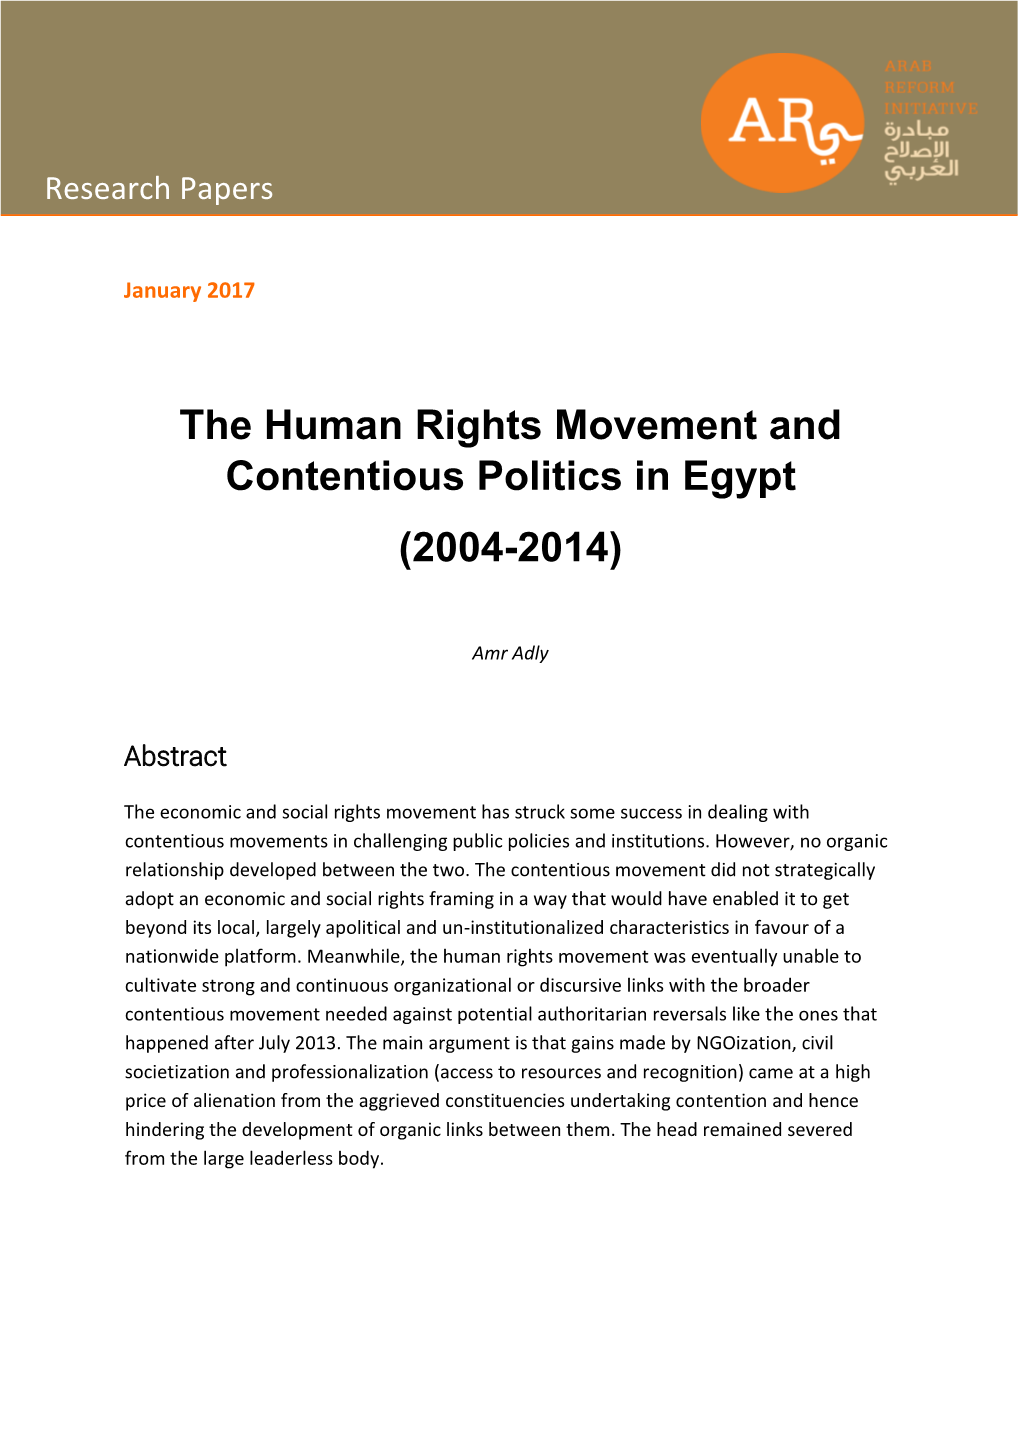 The Human Rights Movement and Contentious Politics in Egypt (2004-2014)